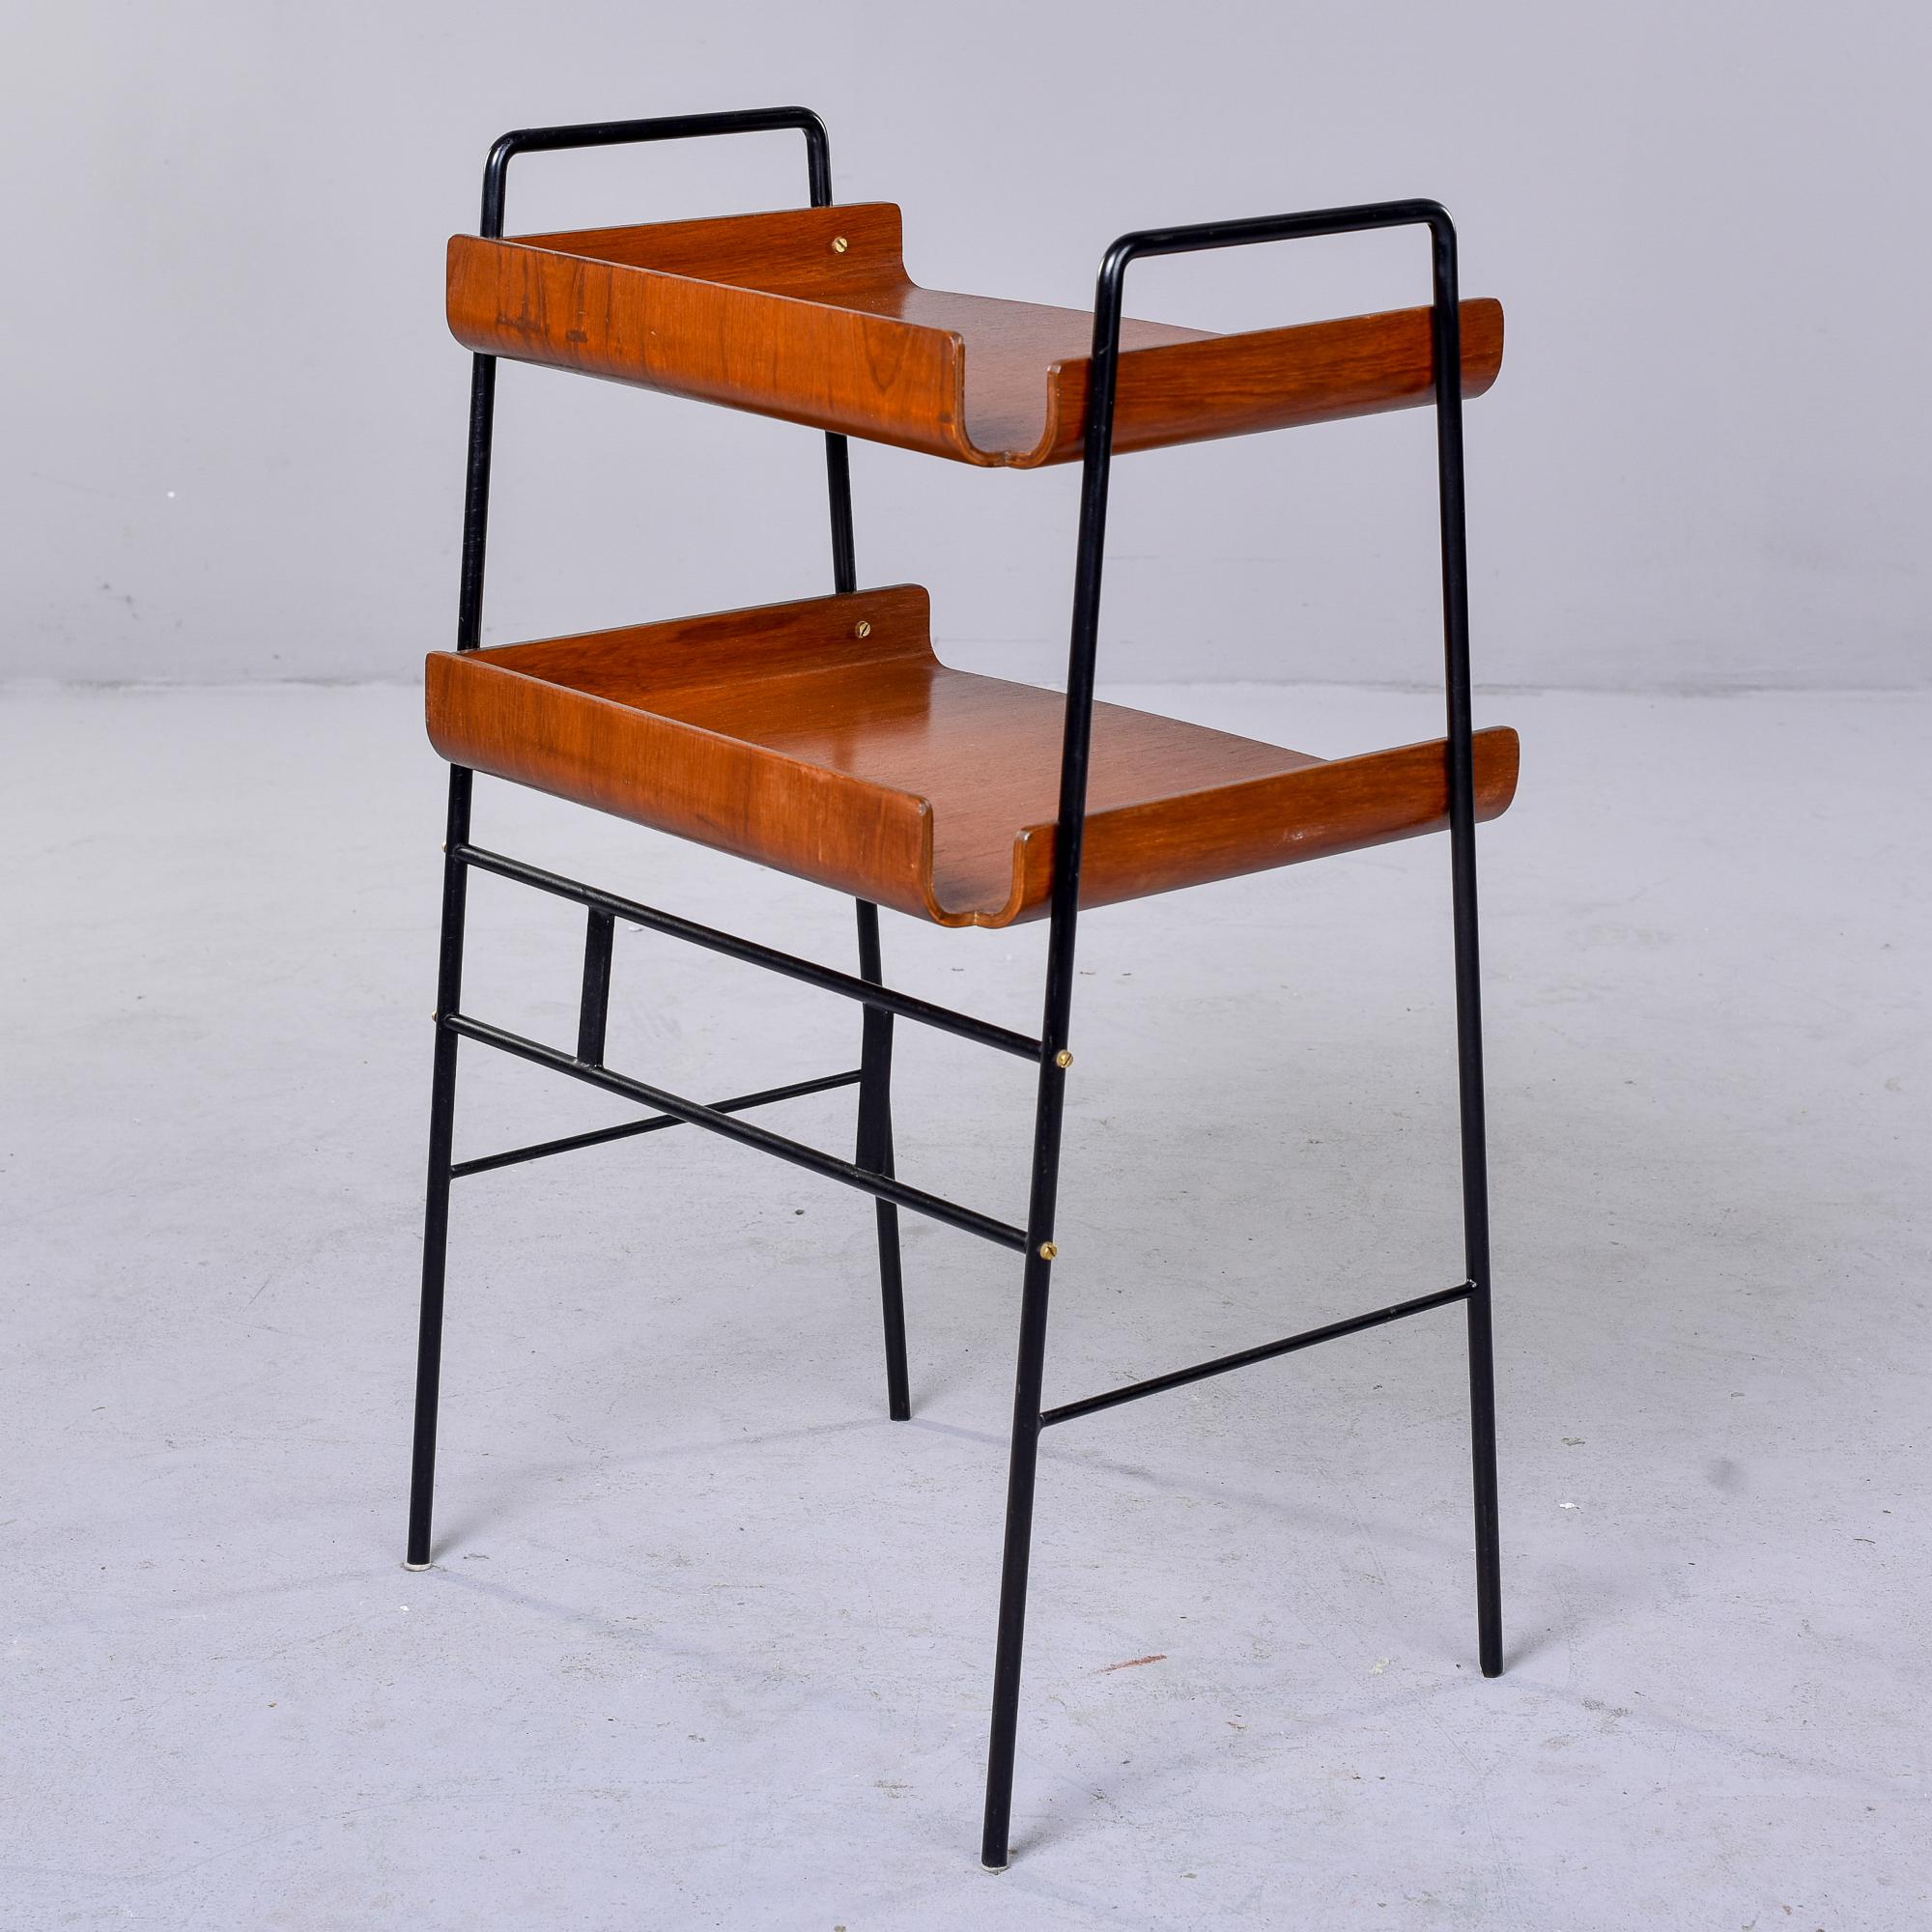 Italian Mid-Century Two Tier Bentwood Table with Slender Black Iron Frame For Sale 3